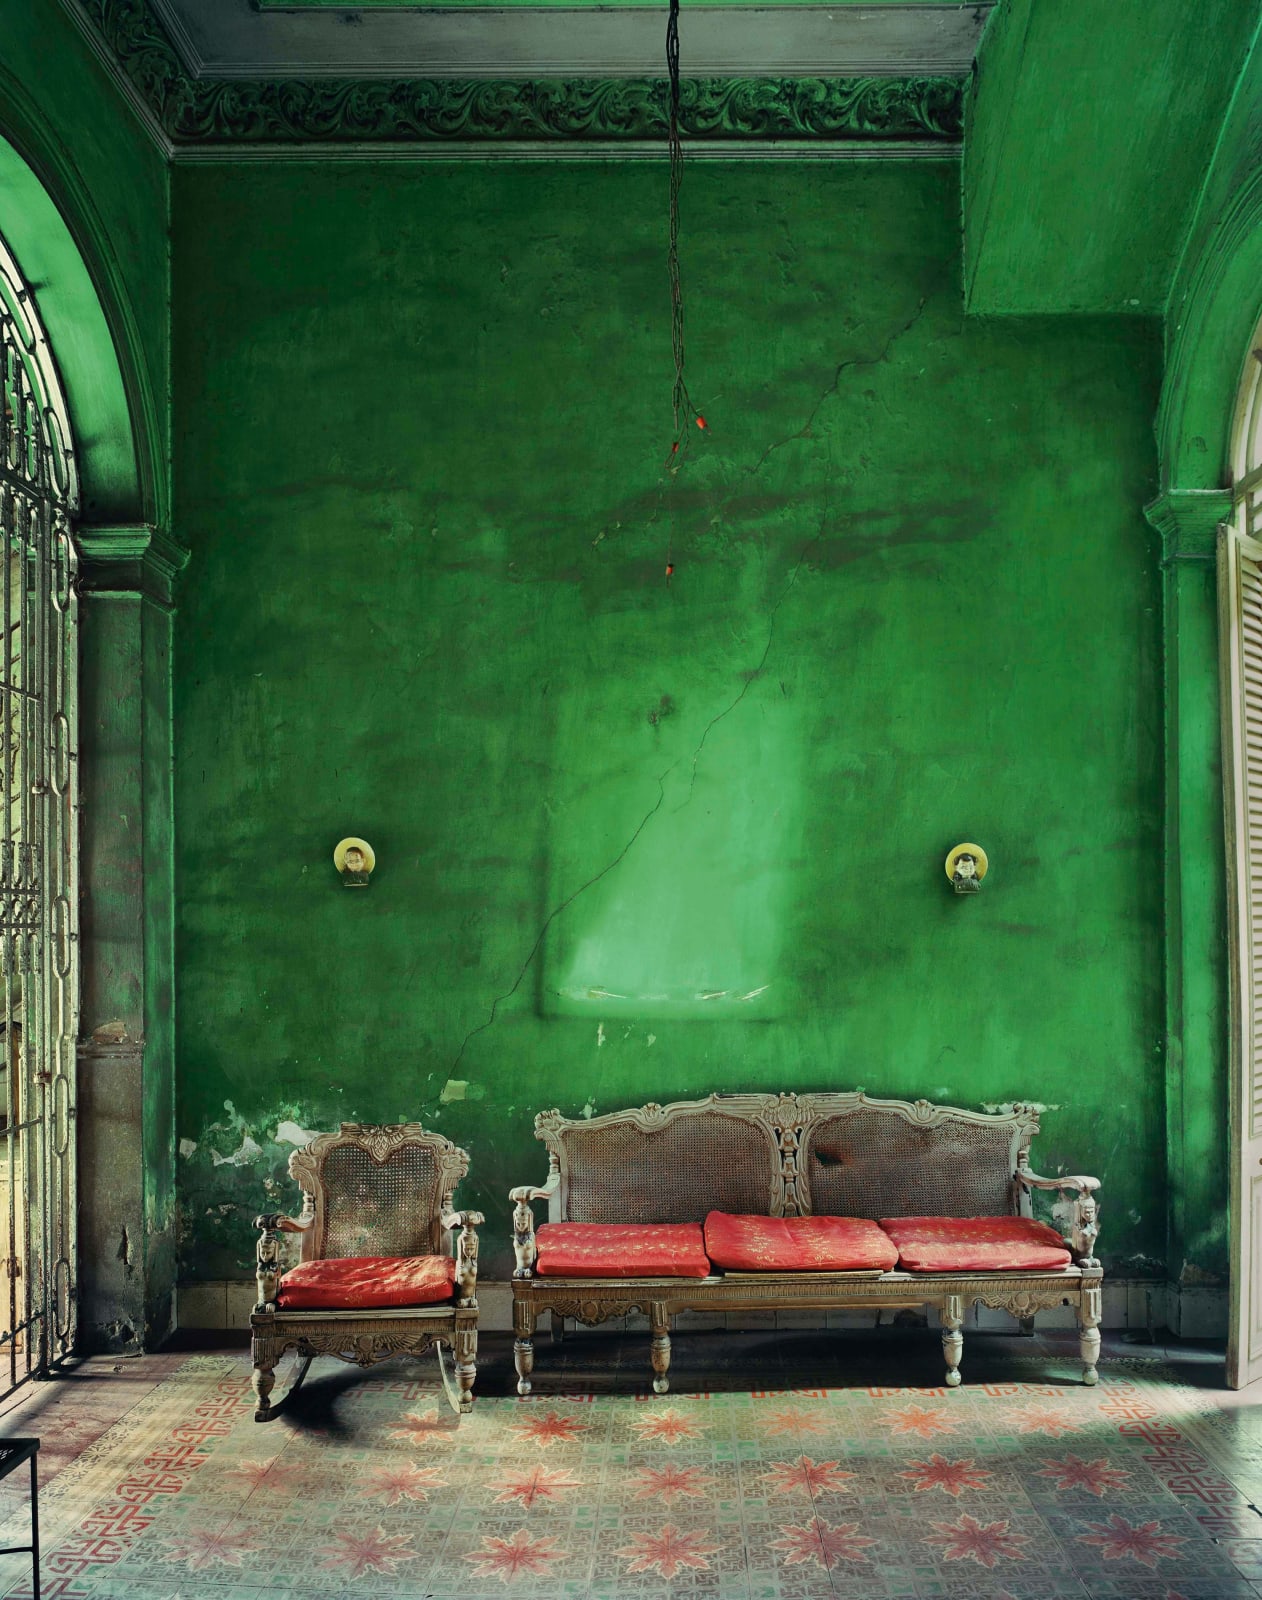 Michael Eastman photograph of green interior with red couch cushions in Havana, Cuba